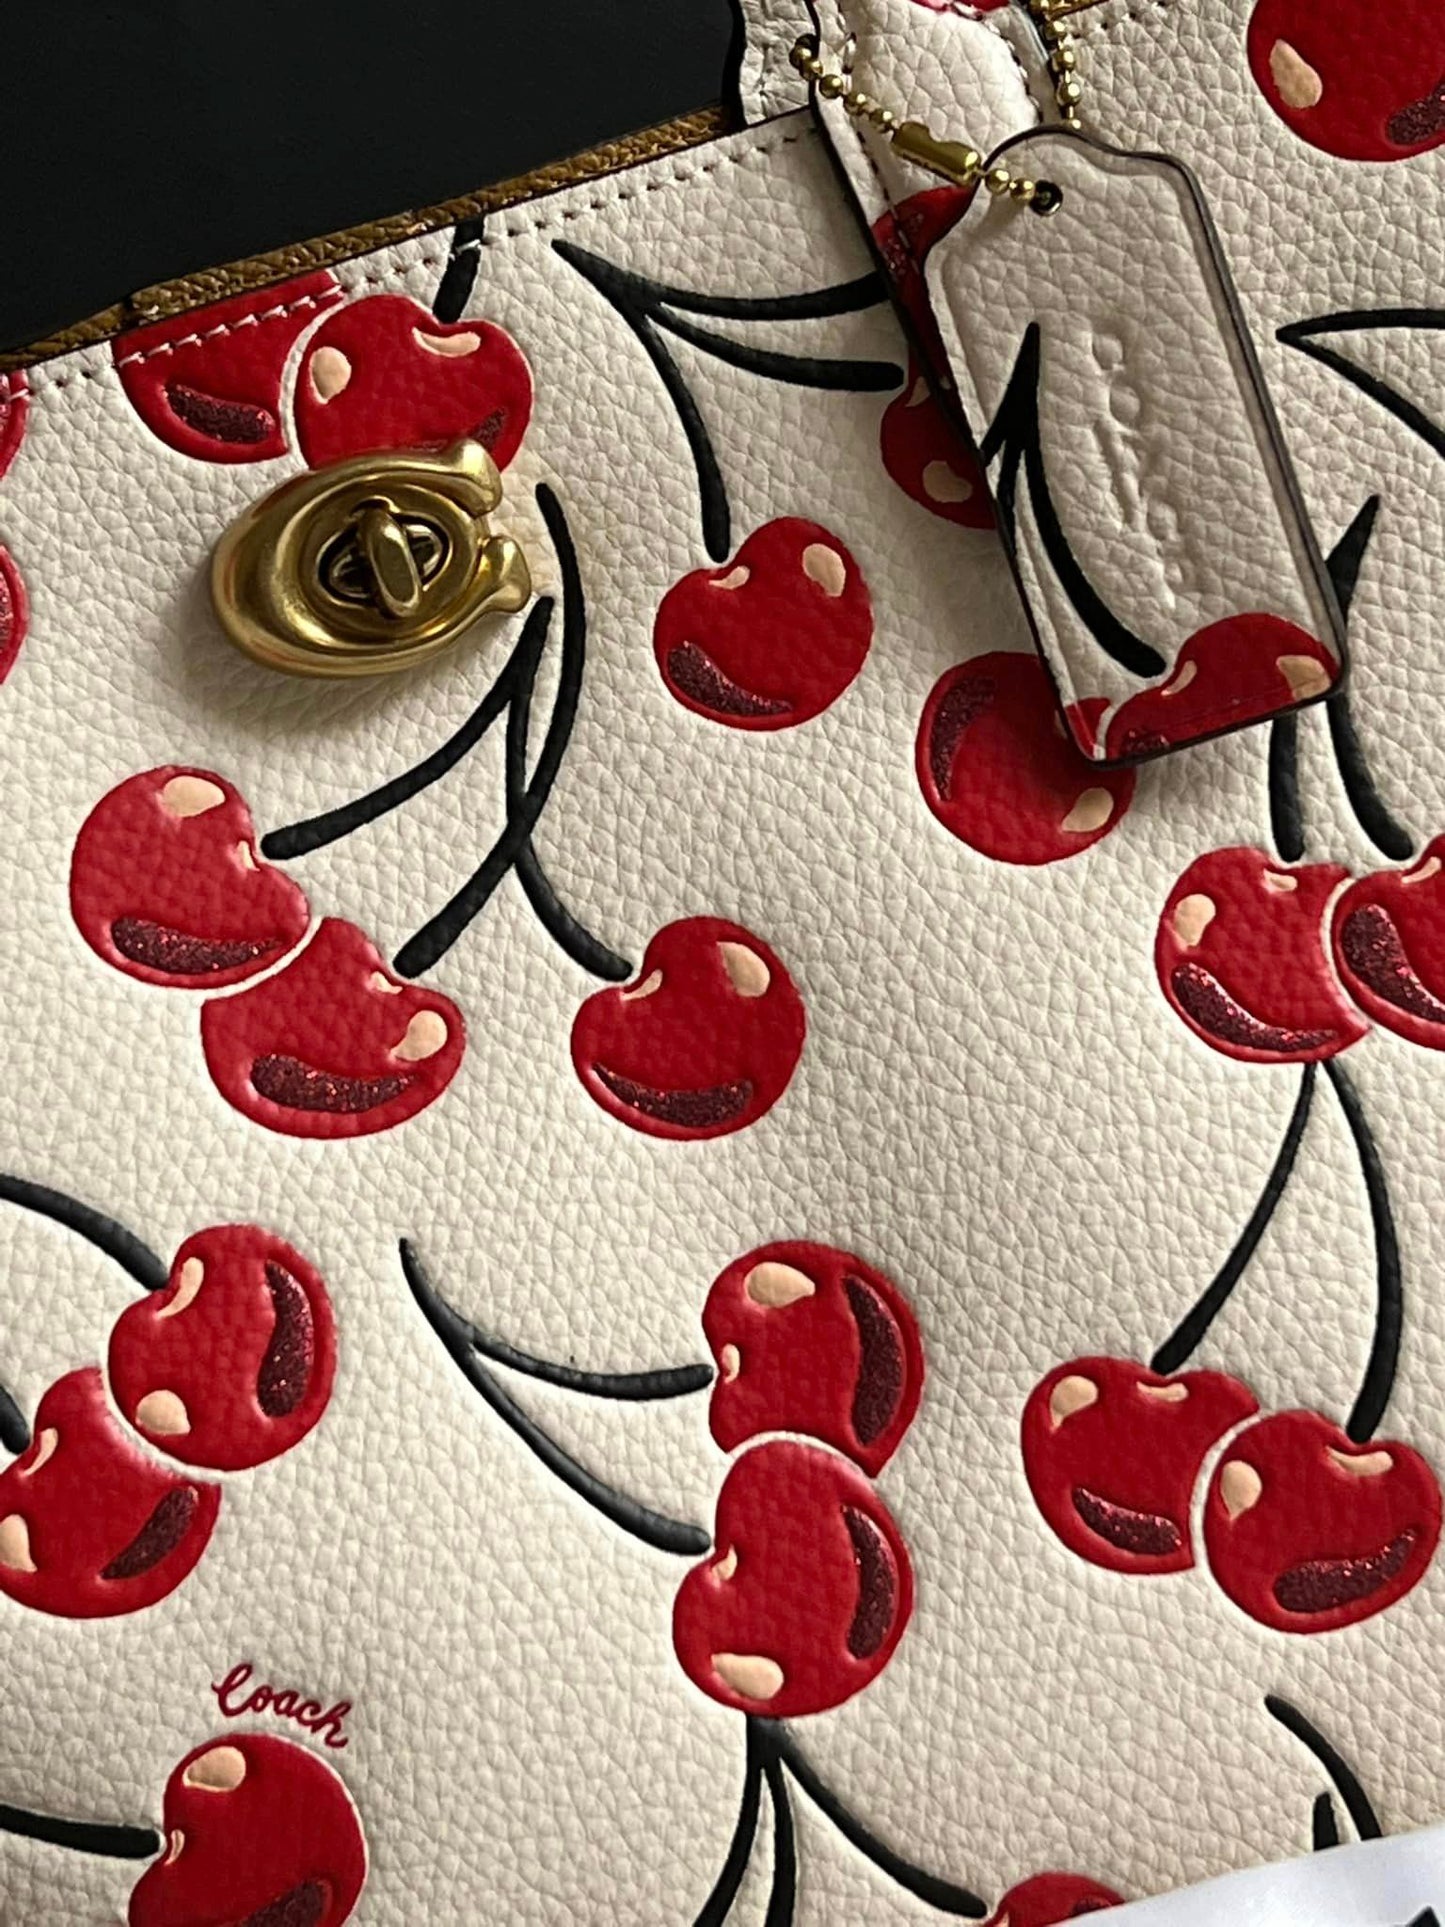 Coach Willow Tote 24 With Cherry Print